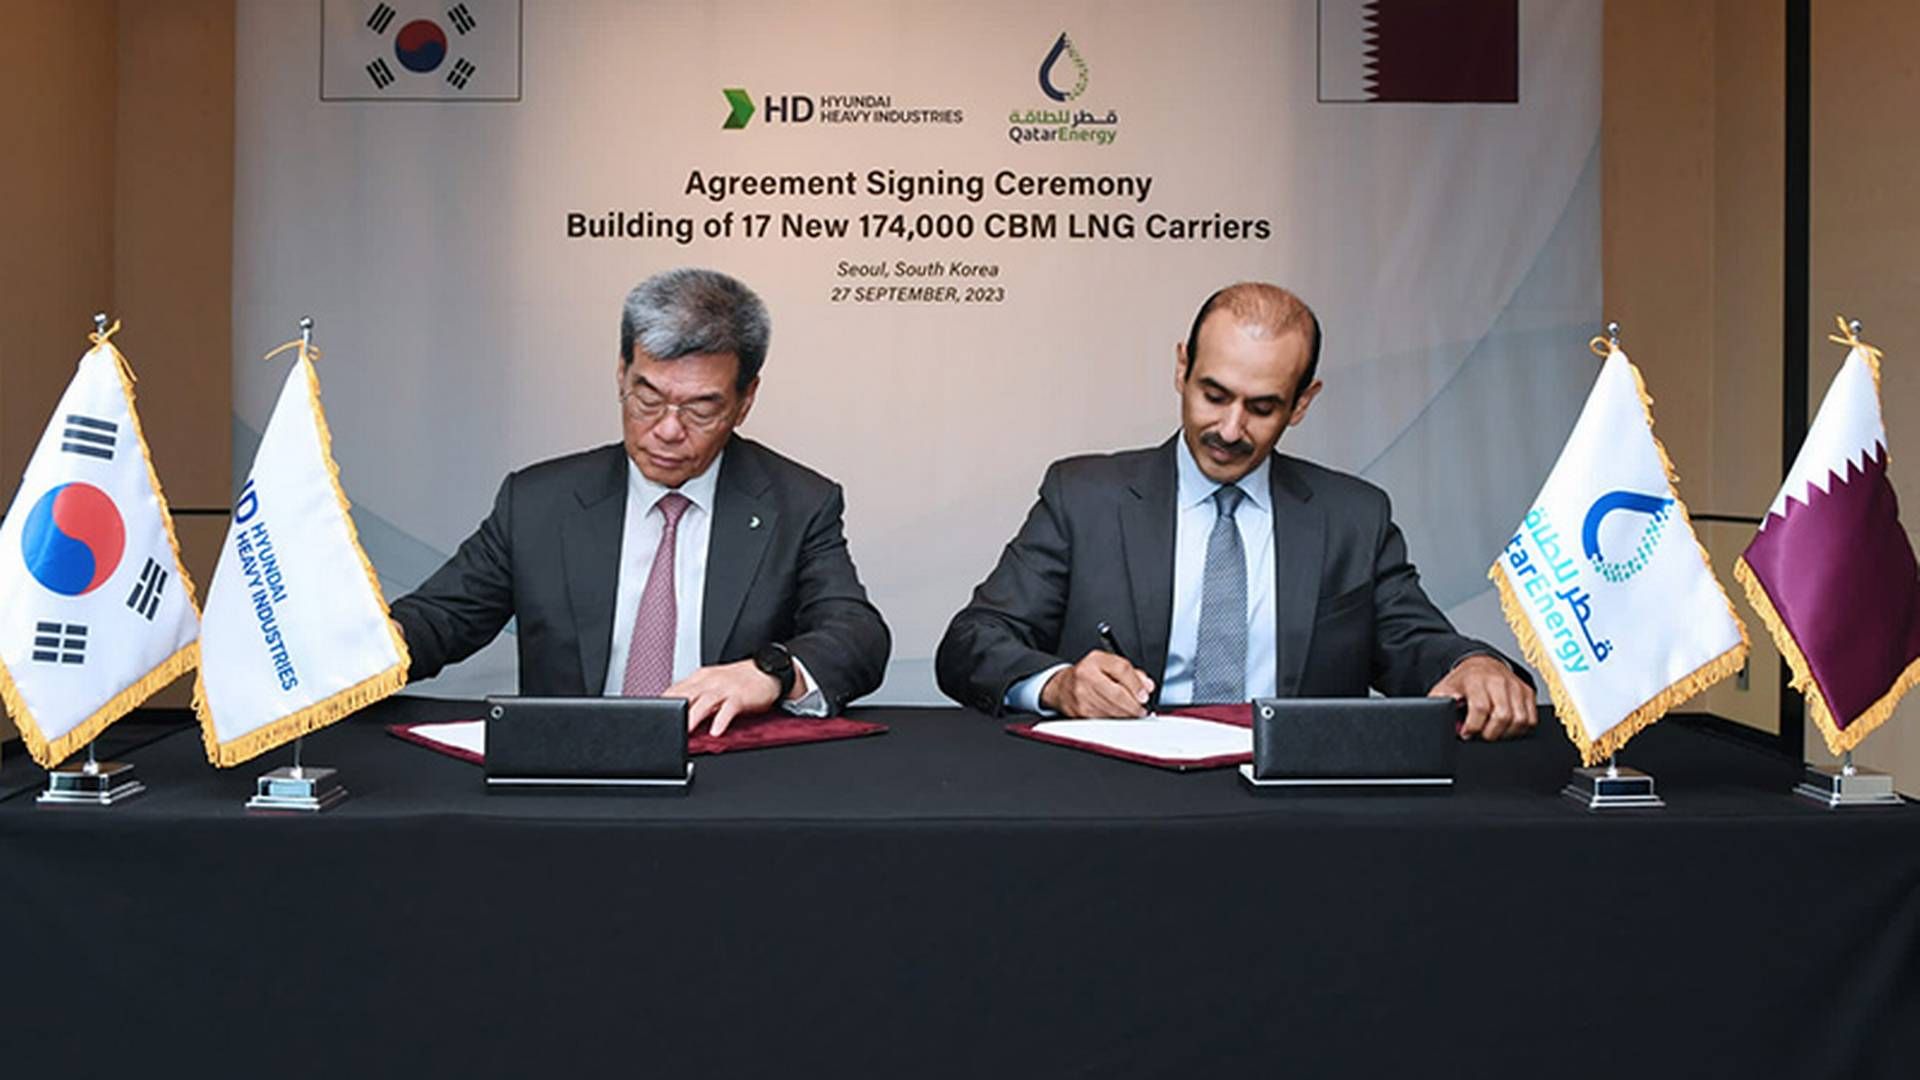 The agreement between the South Korean shipyard and Qatar Energy for the purchase of 17 LNG carriers will be signed on September 27. | Photo: Qatarenergy